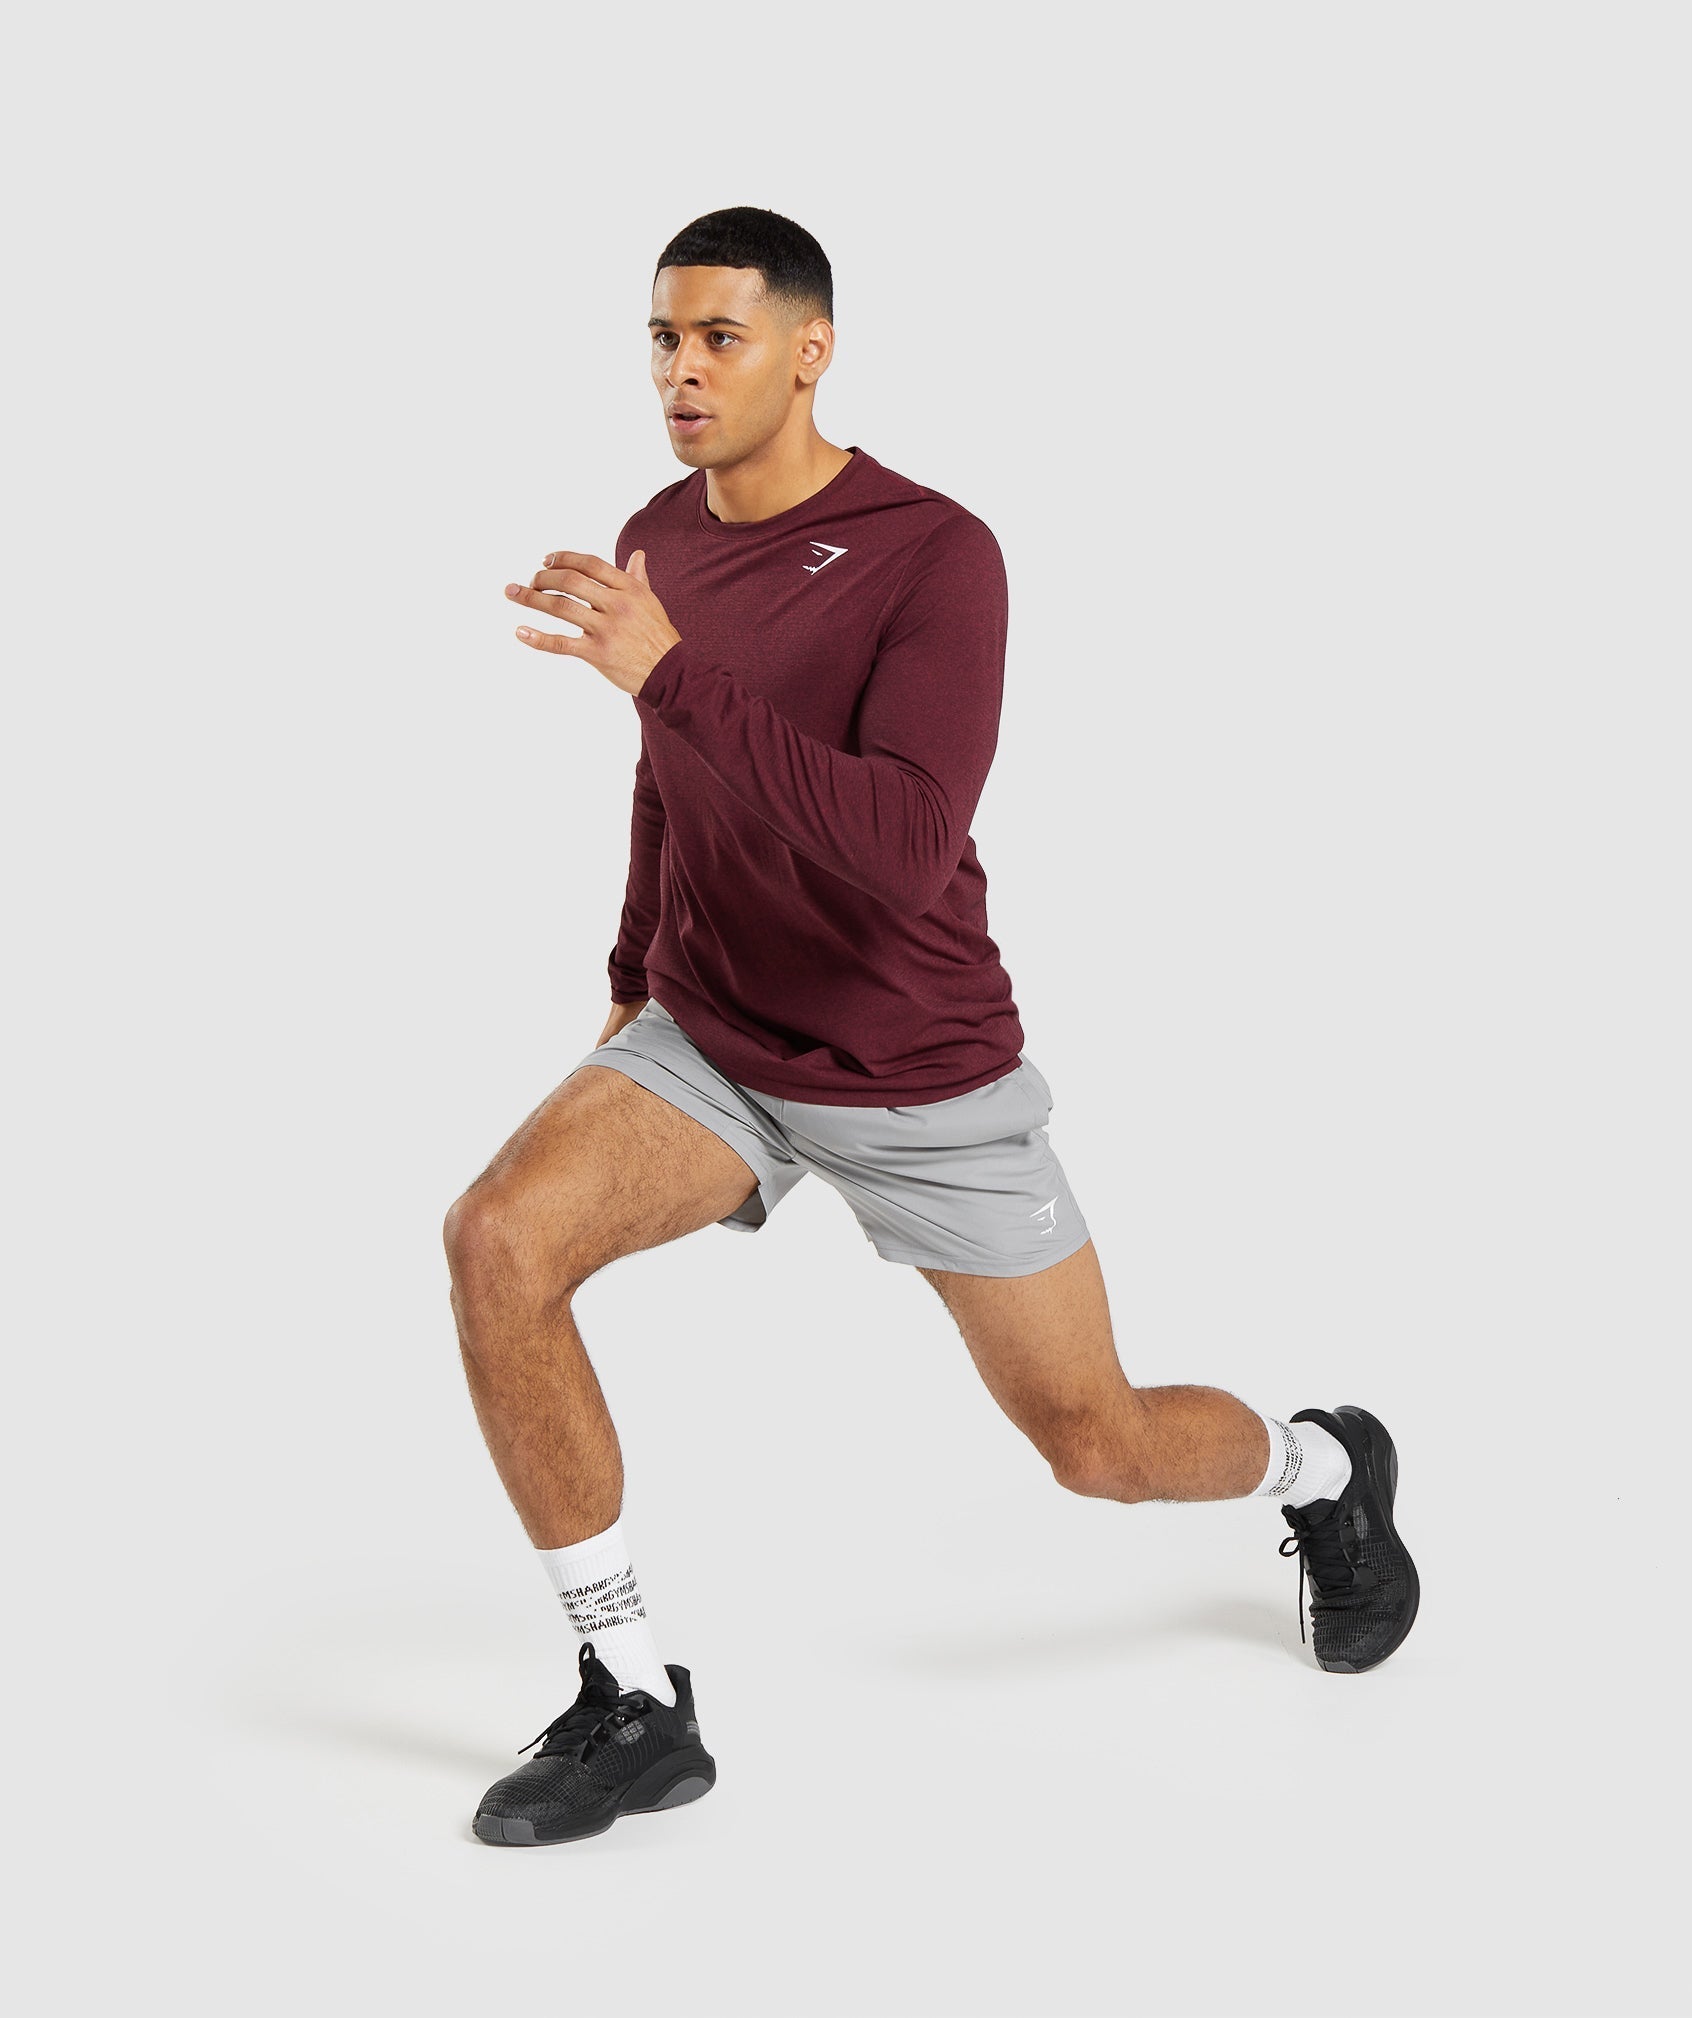 Arrival Seamless Long Sleeve T-Shirt in Burgundy Red Marl - view 5